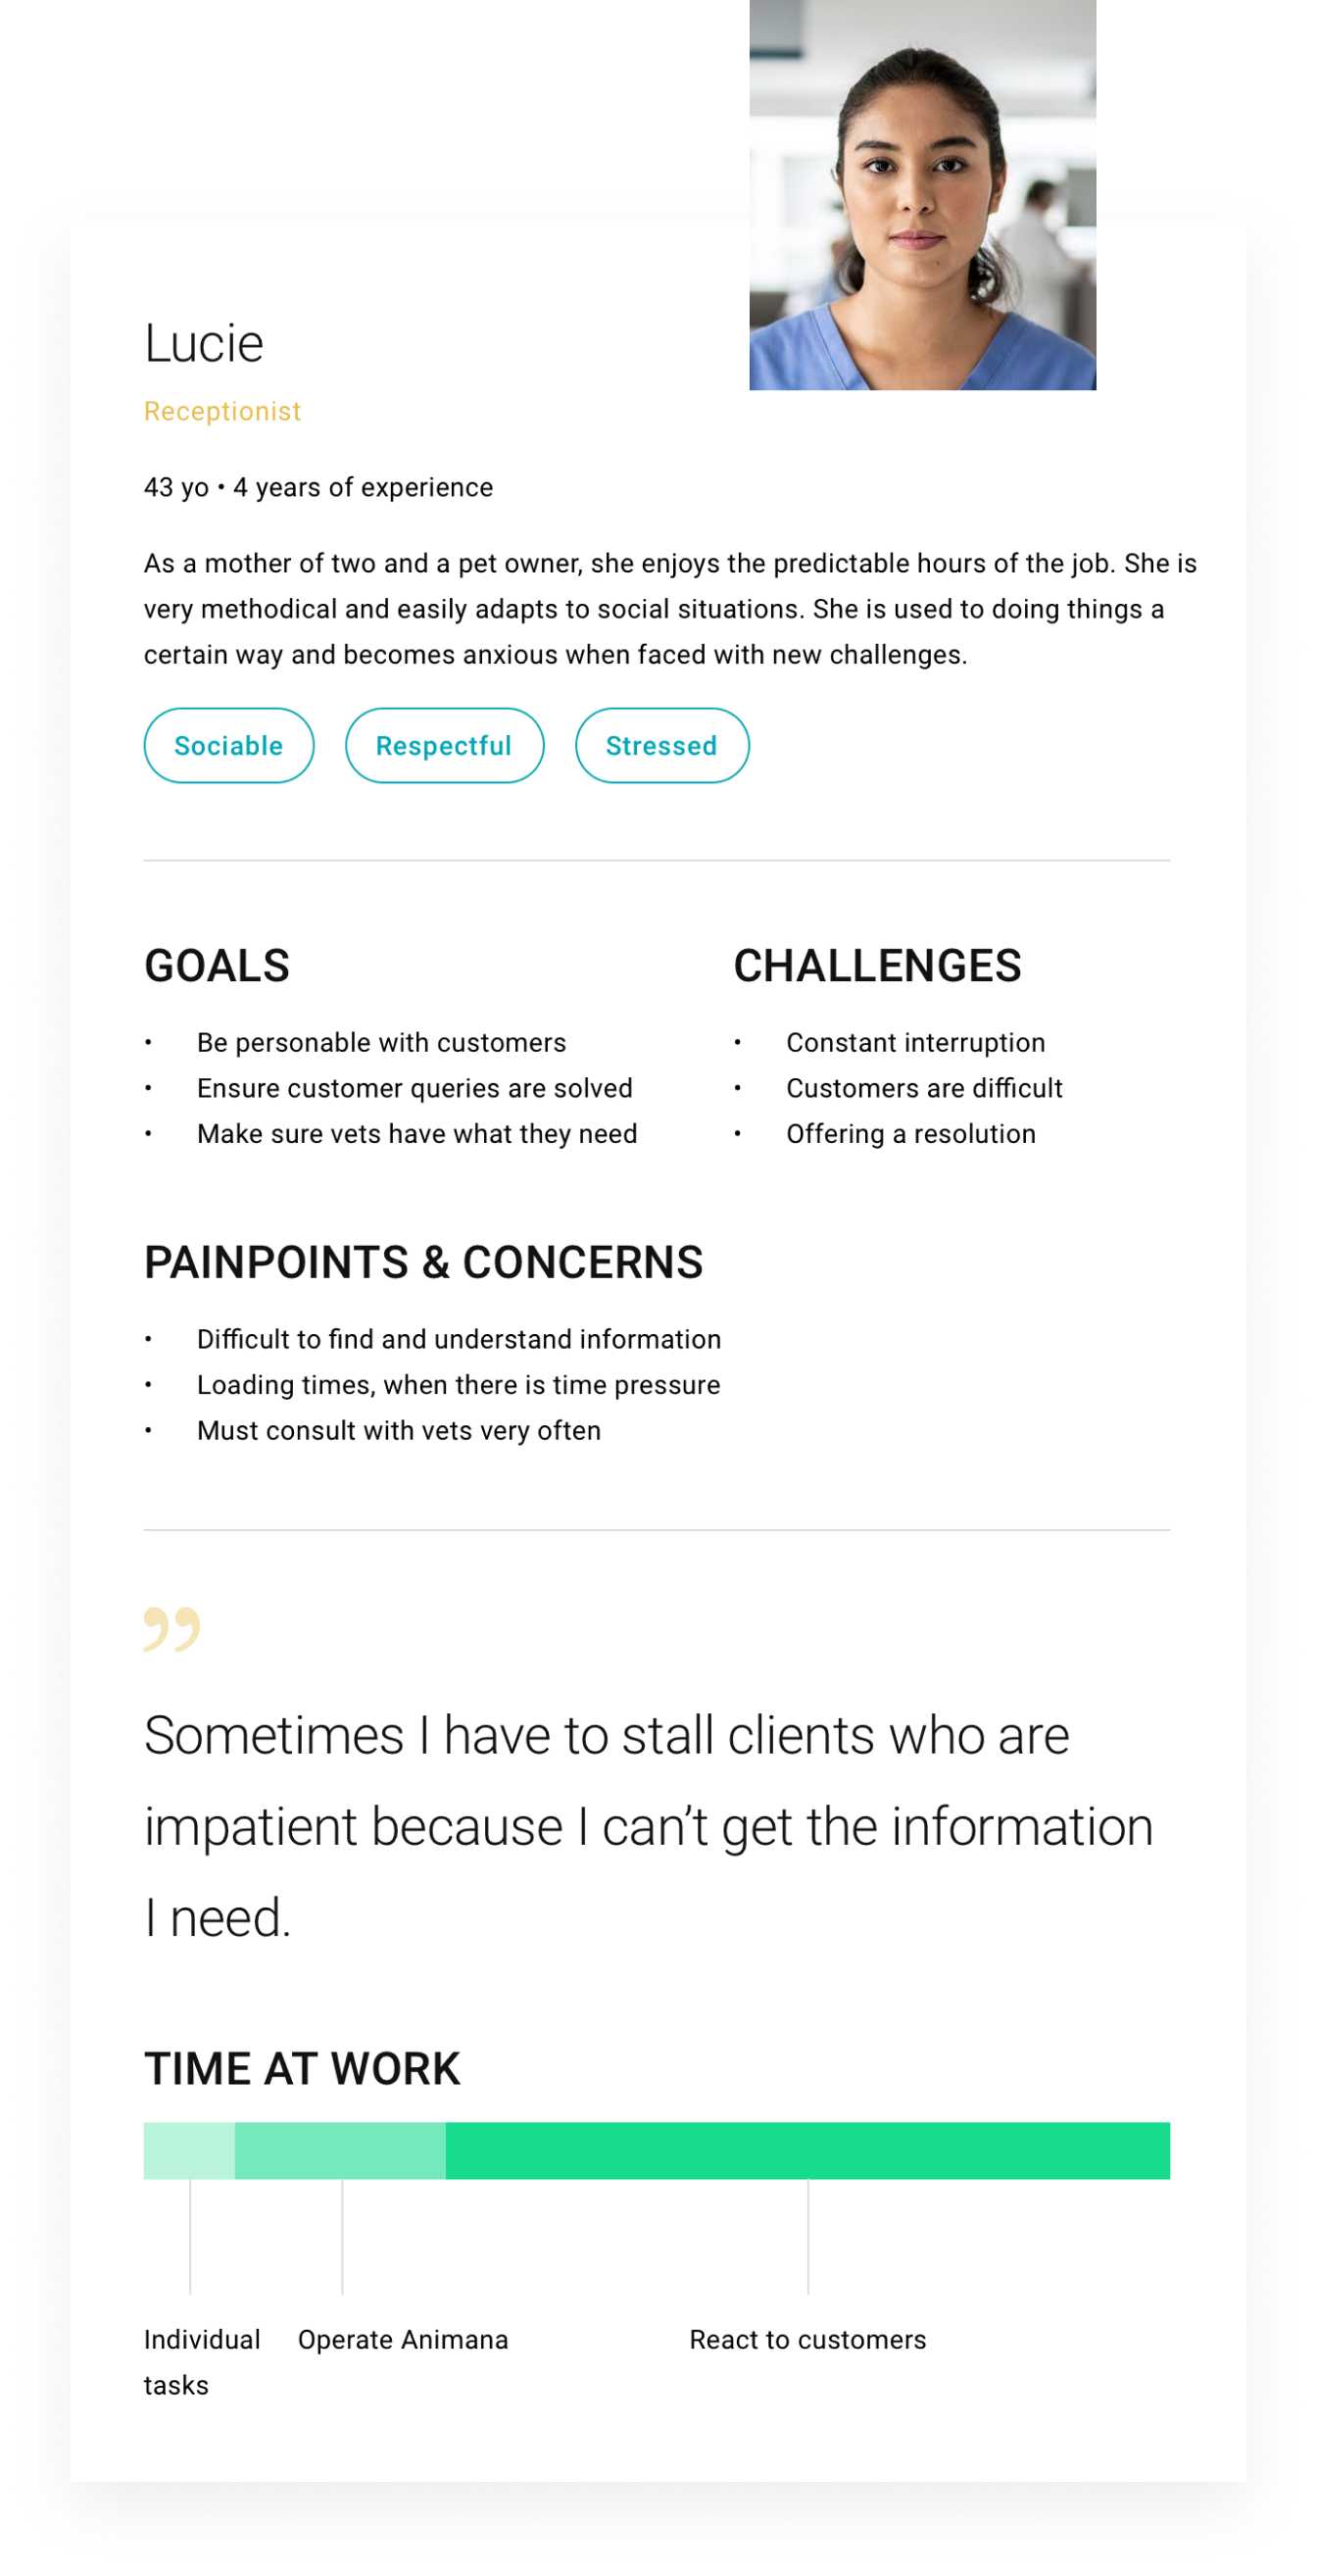 User persona diagram with goals, challenges and concerns